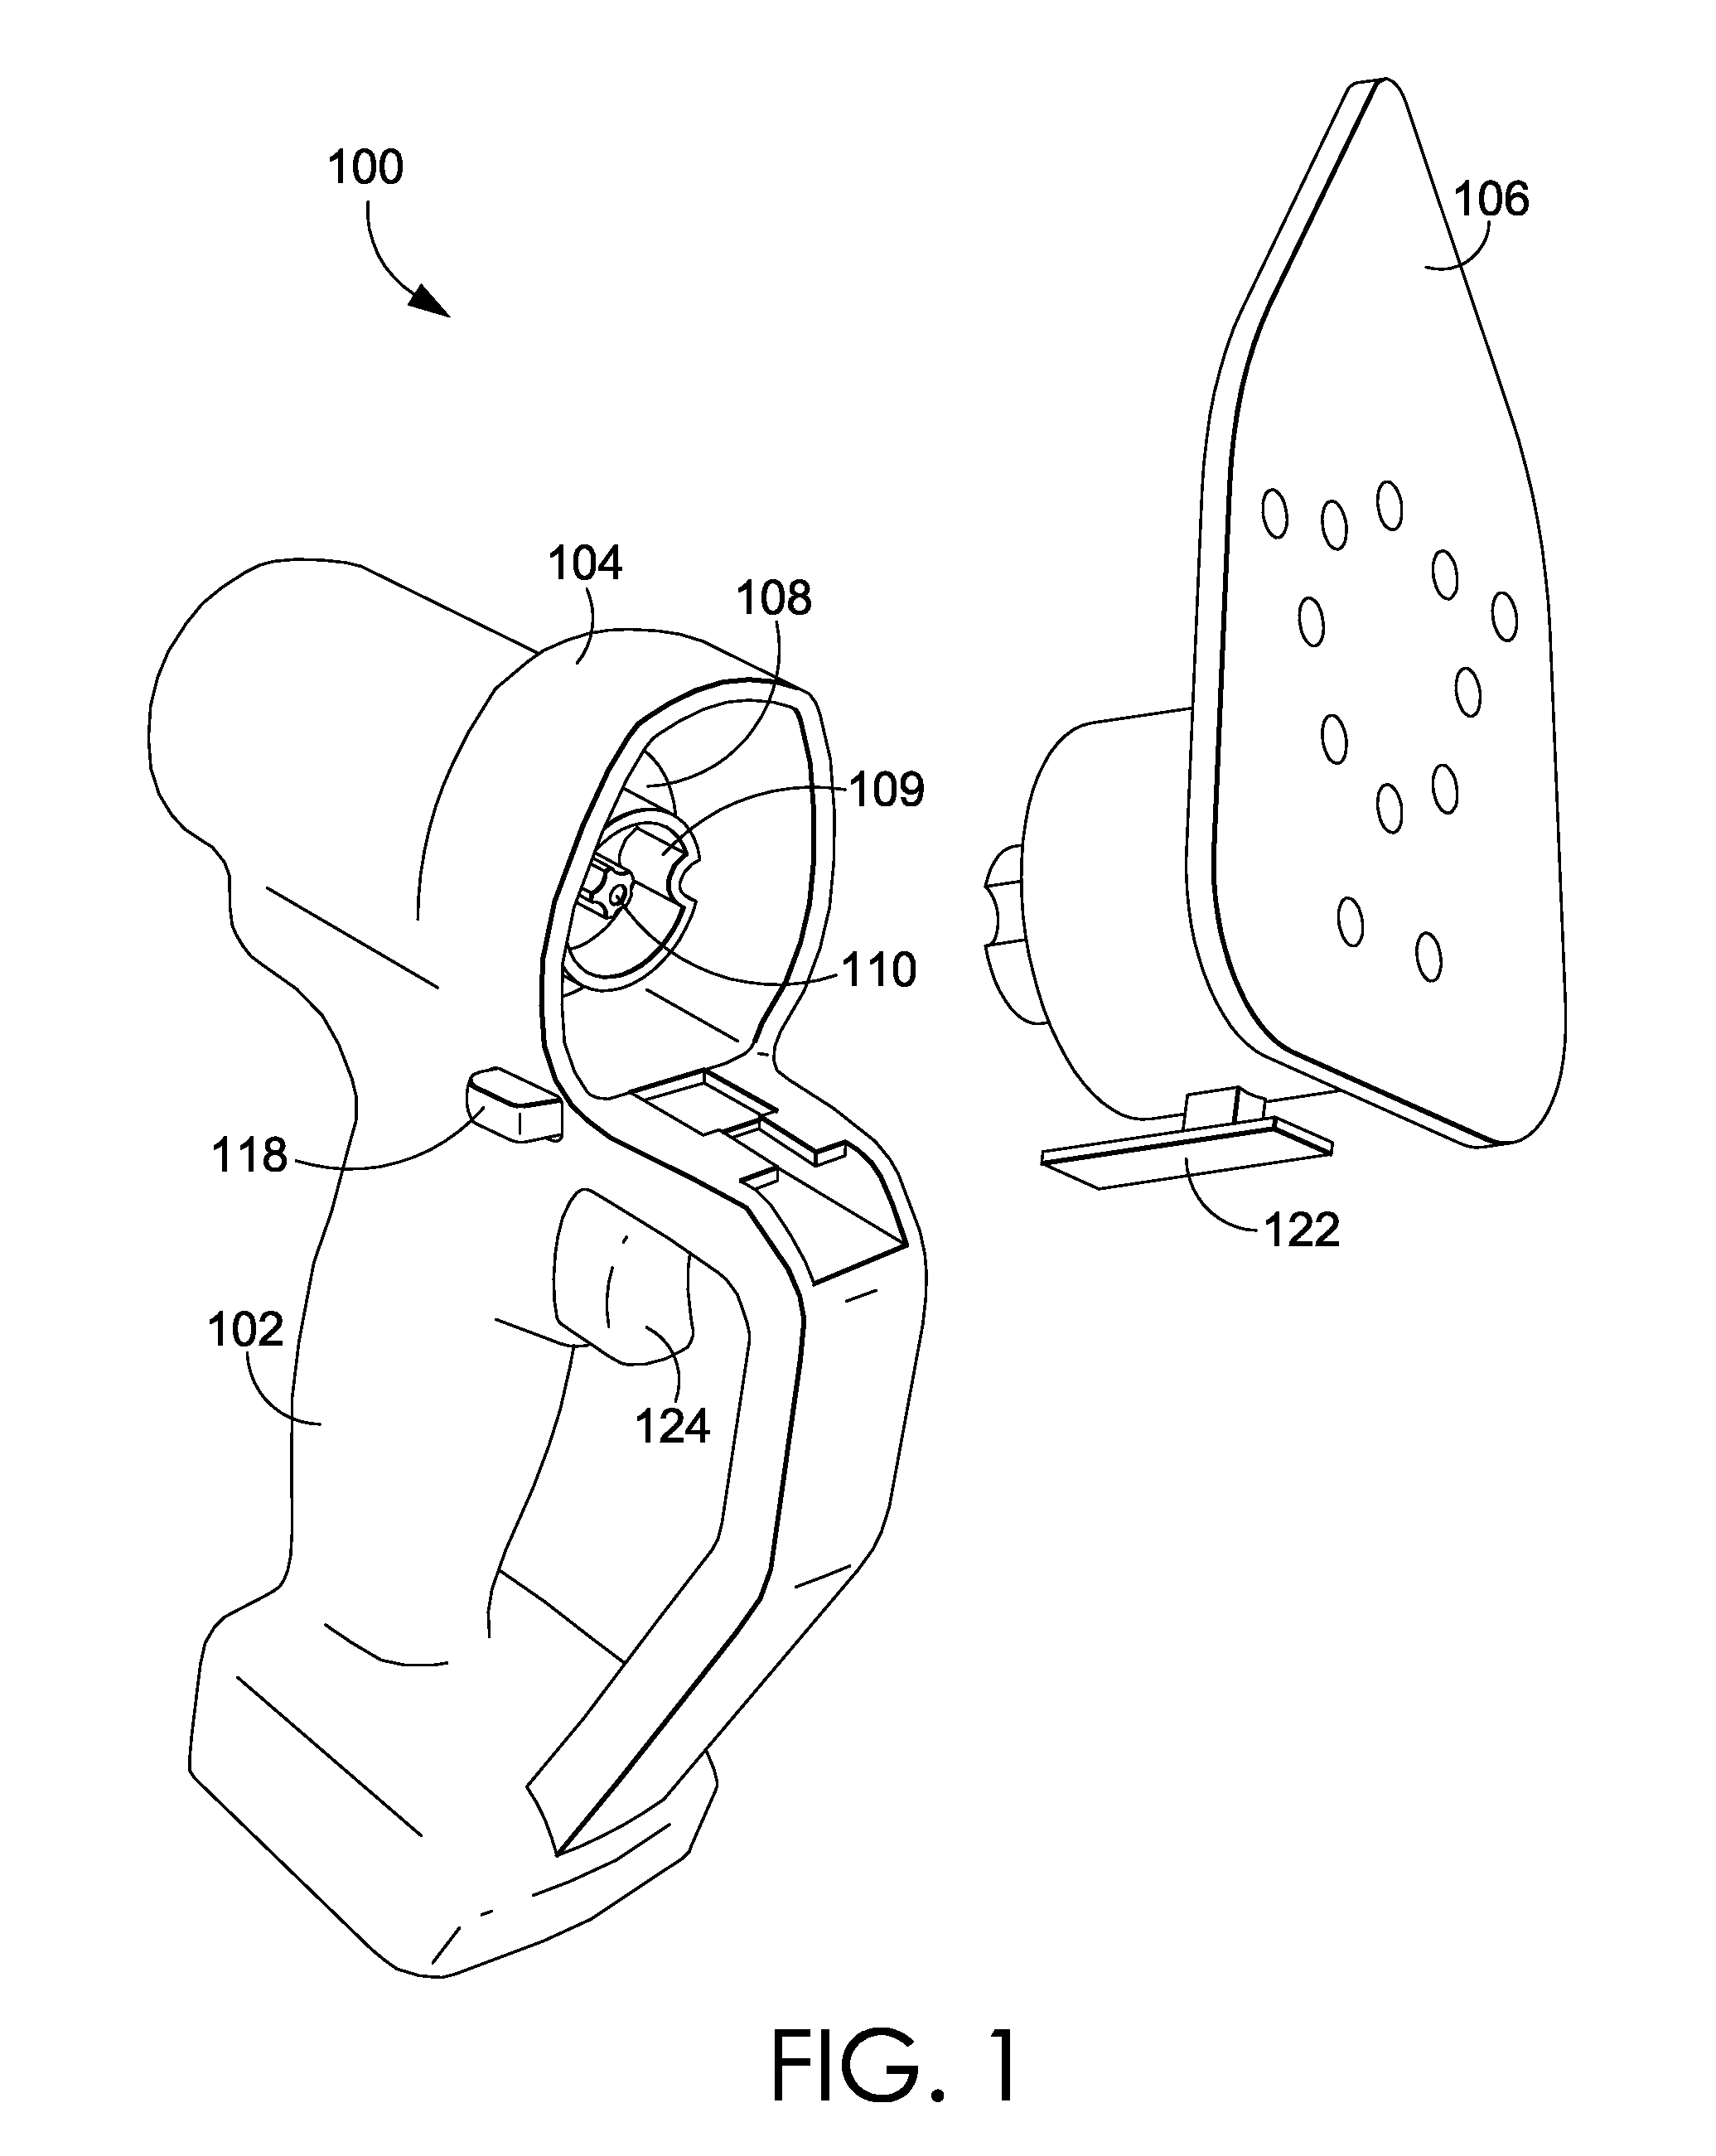 Multi-head power tool with reverse lock-out capability